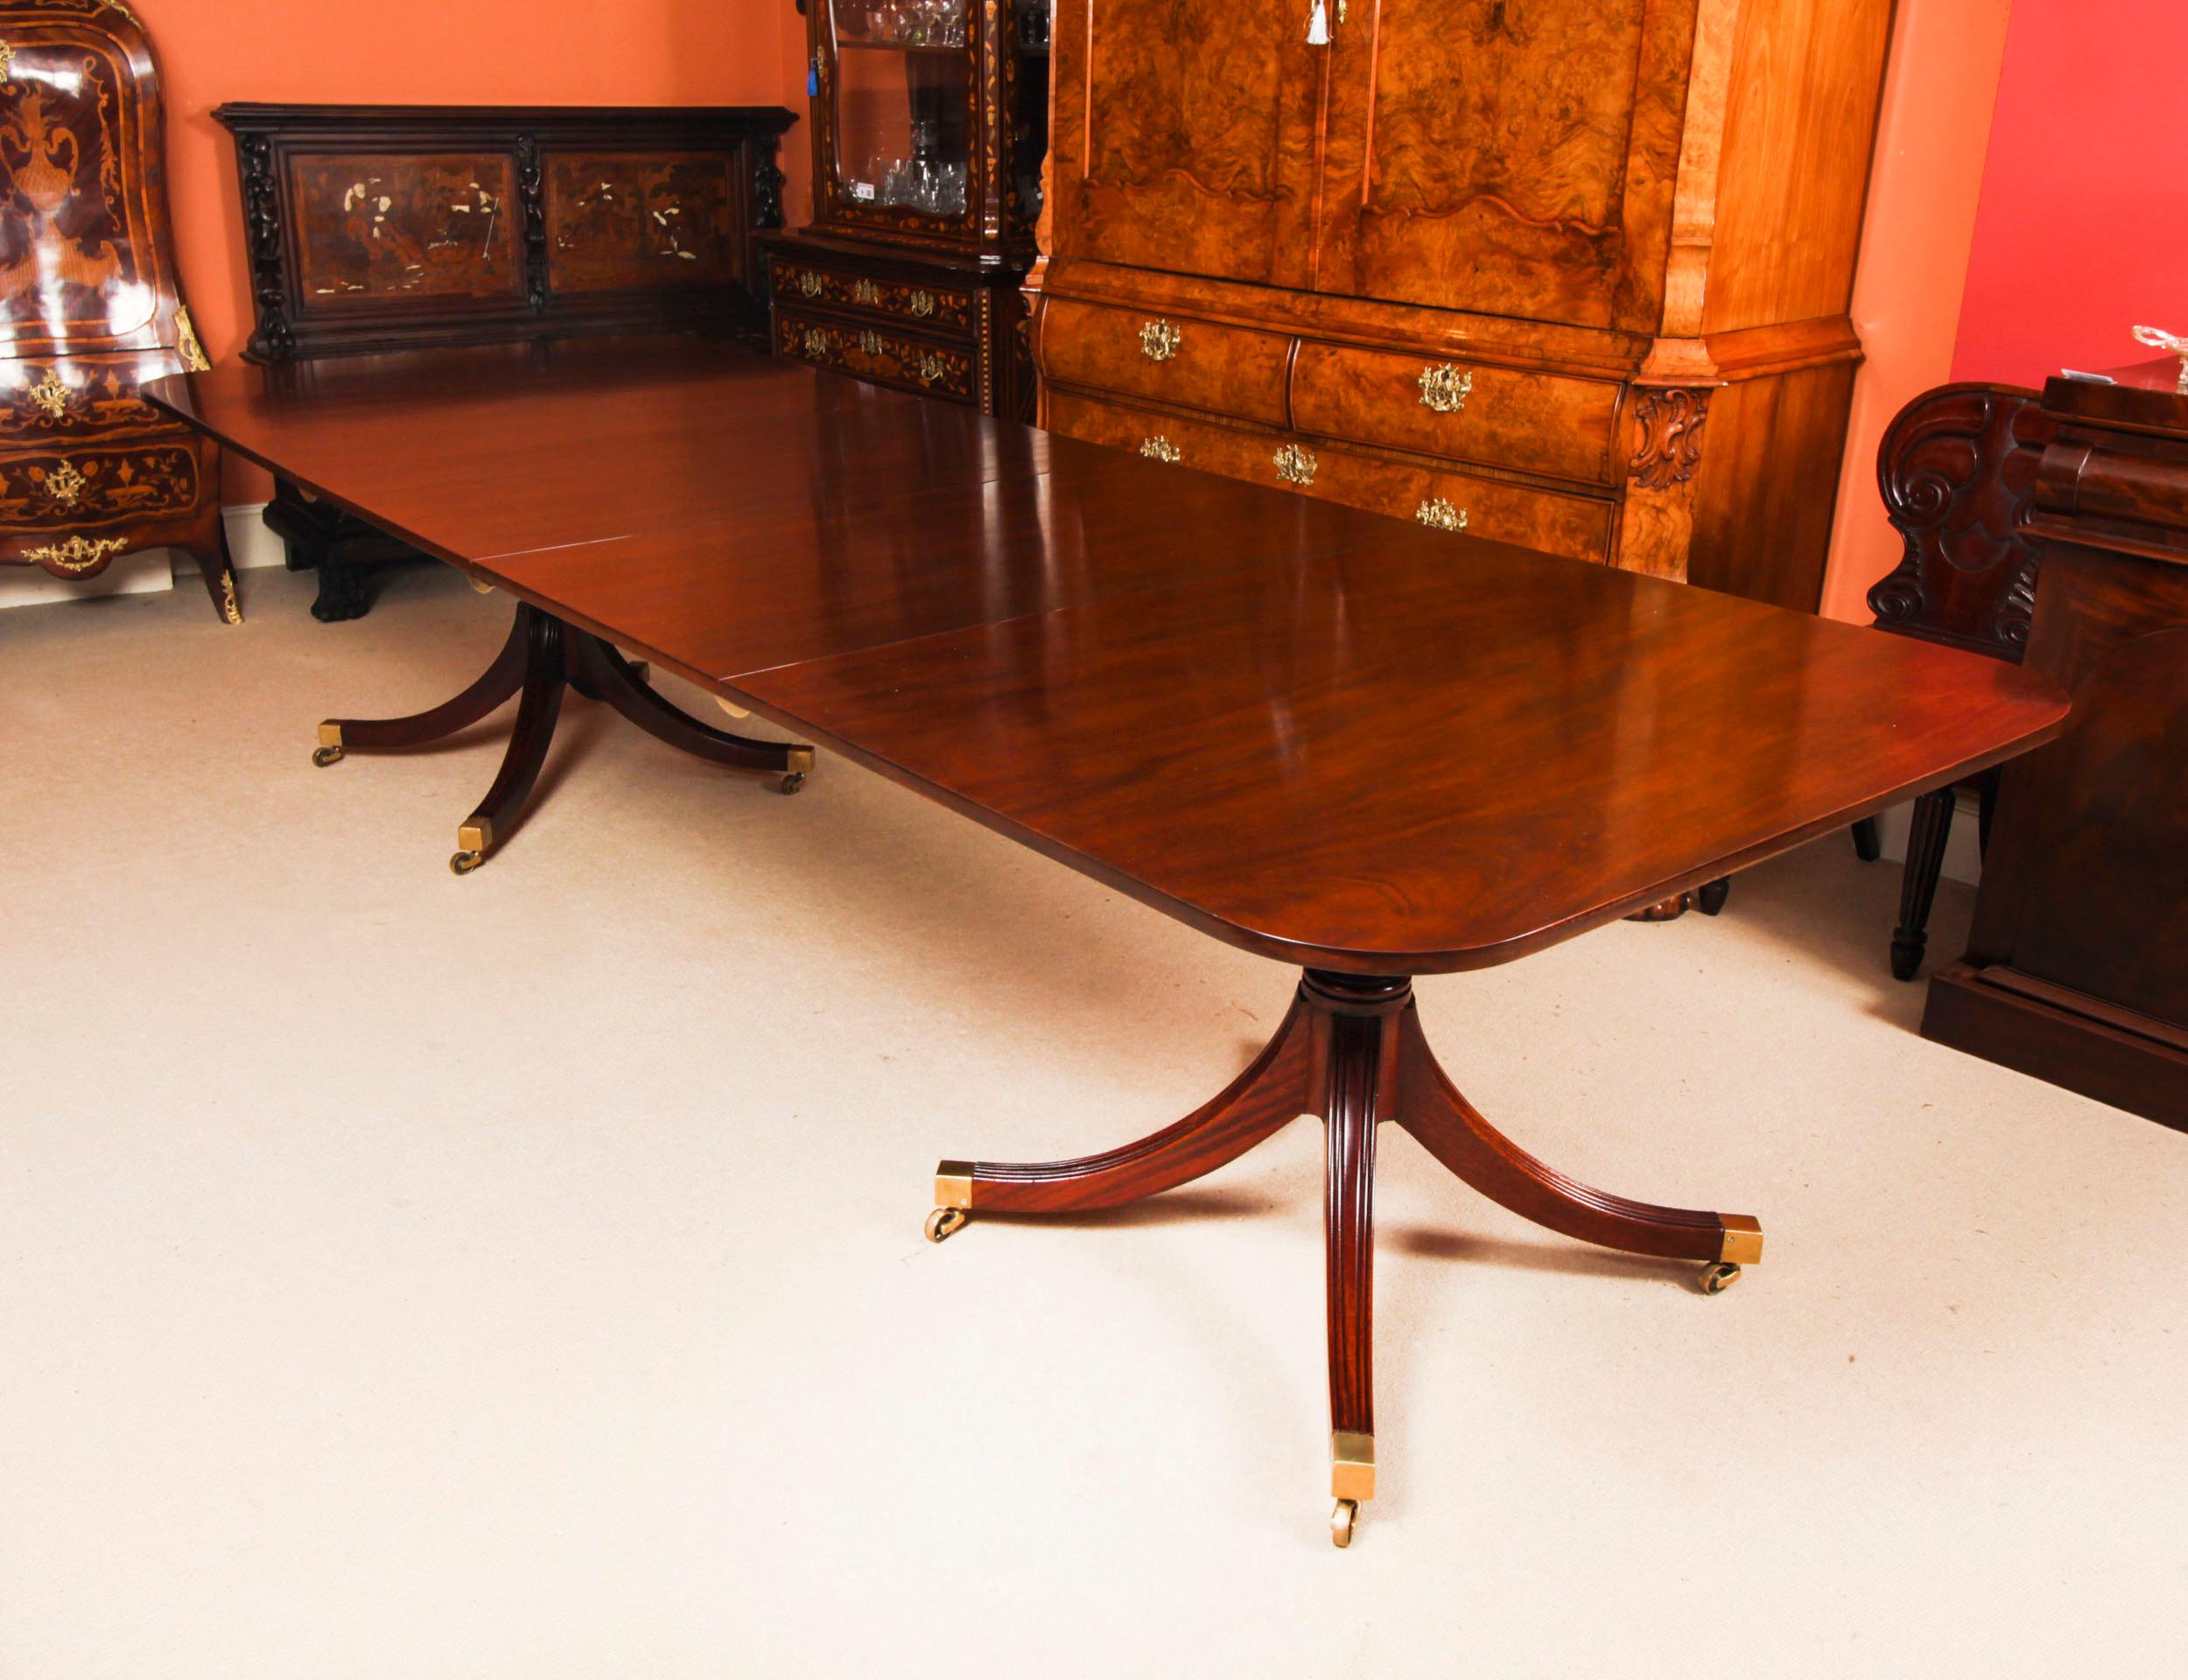 Regency Revival Vintage 12ft Dining Table & 12 Wheat Sheaf Chairs by William Tillman 20th C For Sale